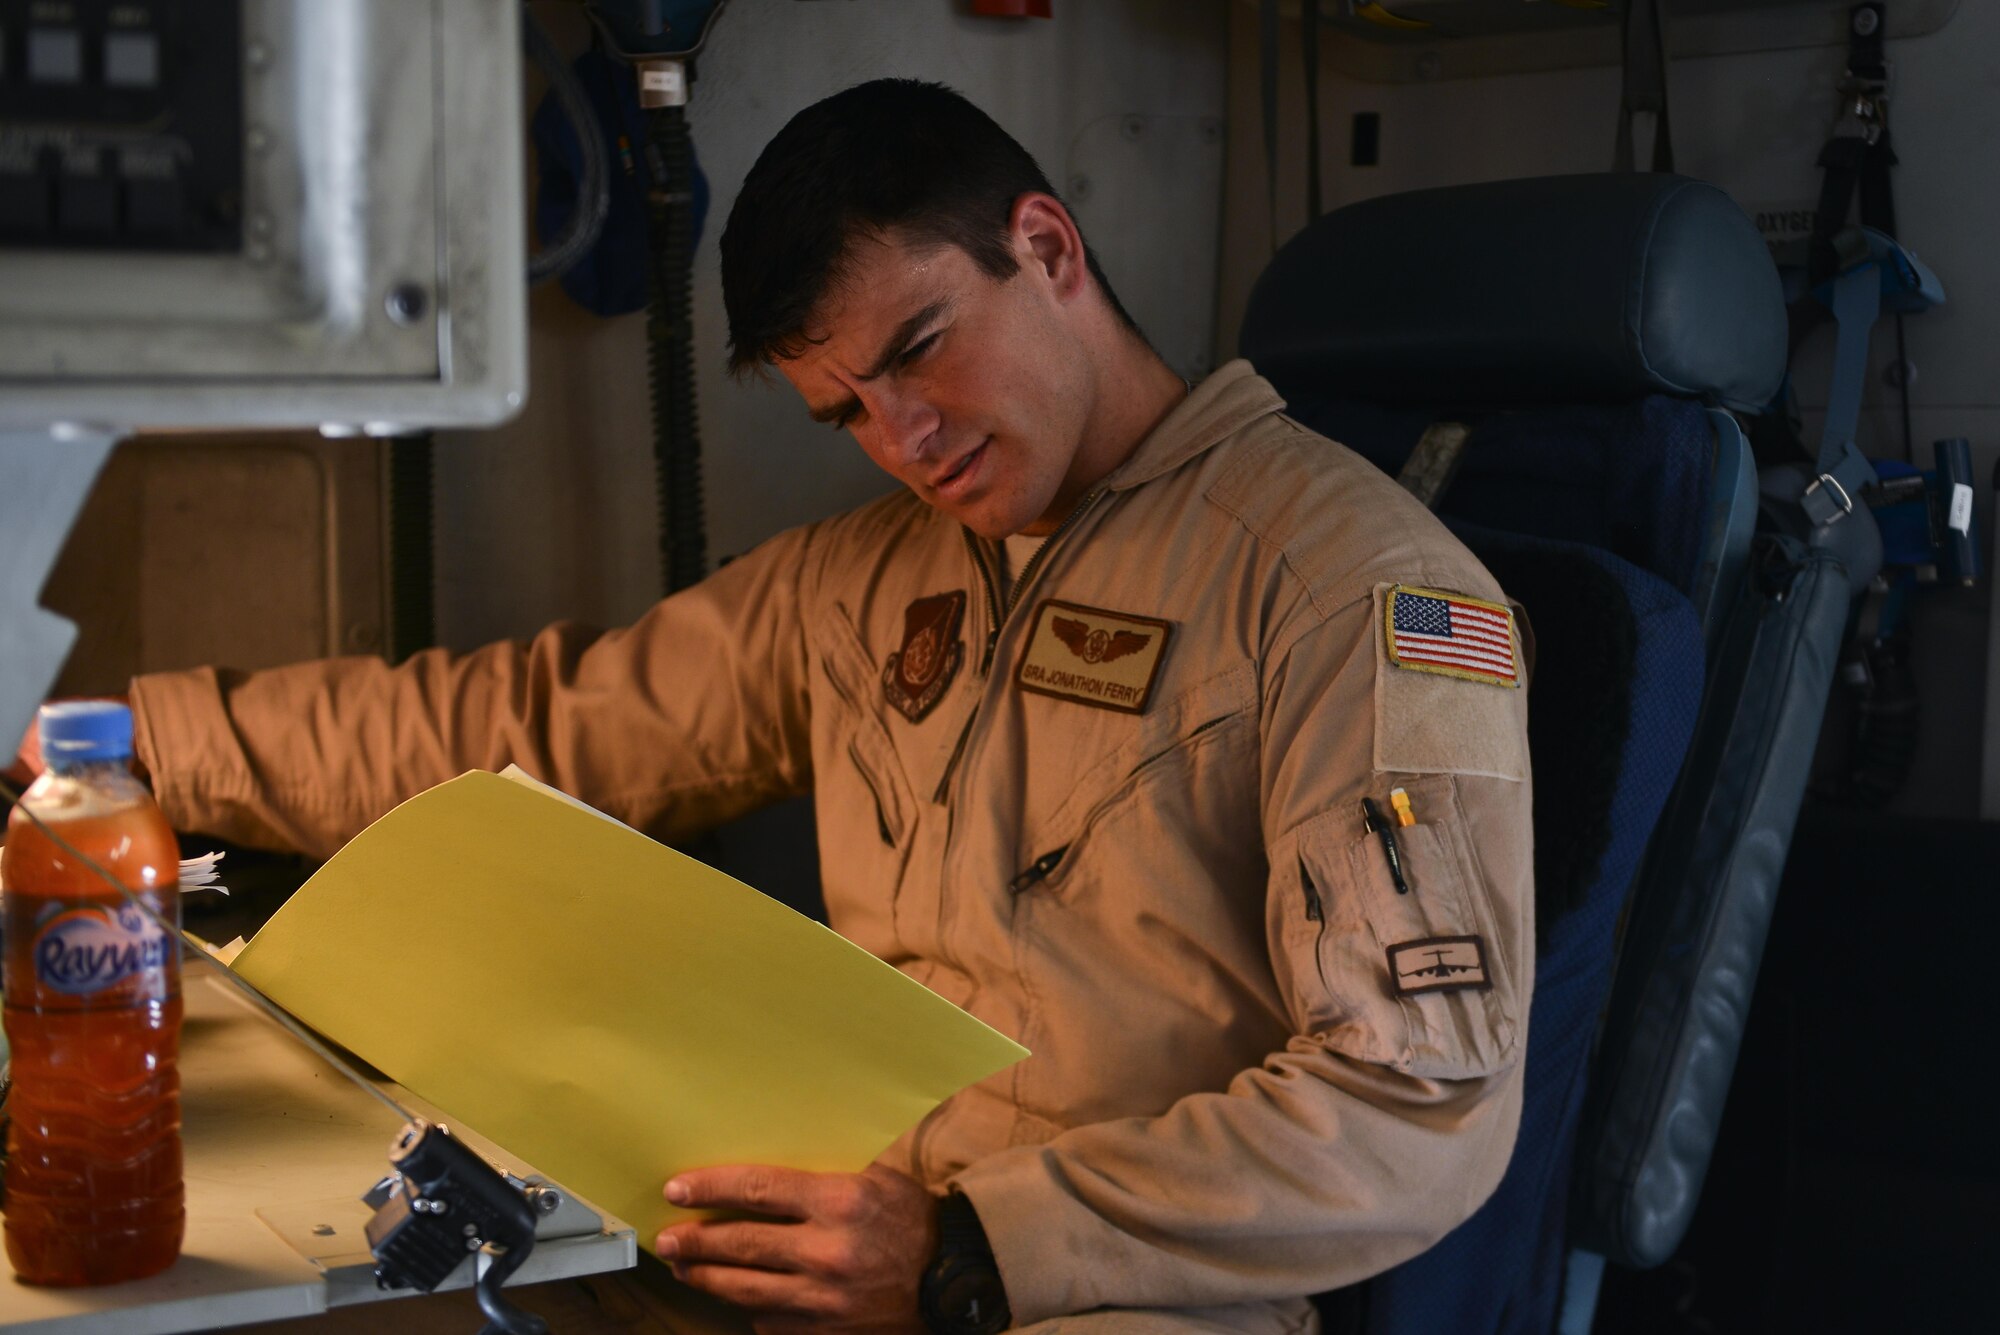 Senior Airman Jonathon Ferry, 816th Expeditionary Airlift Squadron, goes over a preflight manifest of cargo prior to take off on a C-17 Globemaster aircraft May 13, 2015 at Al Udeid Air Base, Qatar. Airmen from separate squadrons deployed to Al Udeid helped support a mission for forward deployed members of RED HORSE Civil Engineering to repair a runway in Southwest Asia in support of Operation Inherent Resolve. (U.S. Air Force photo/Staff Sgt. Alexandre Montes)